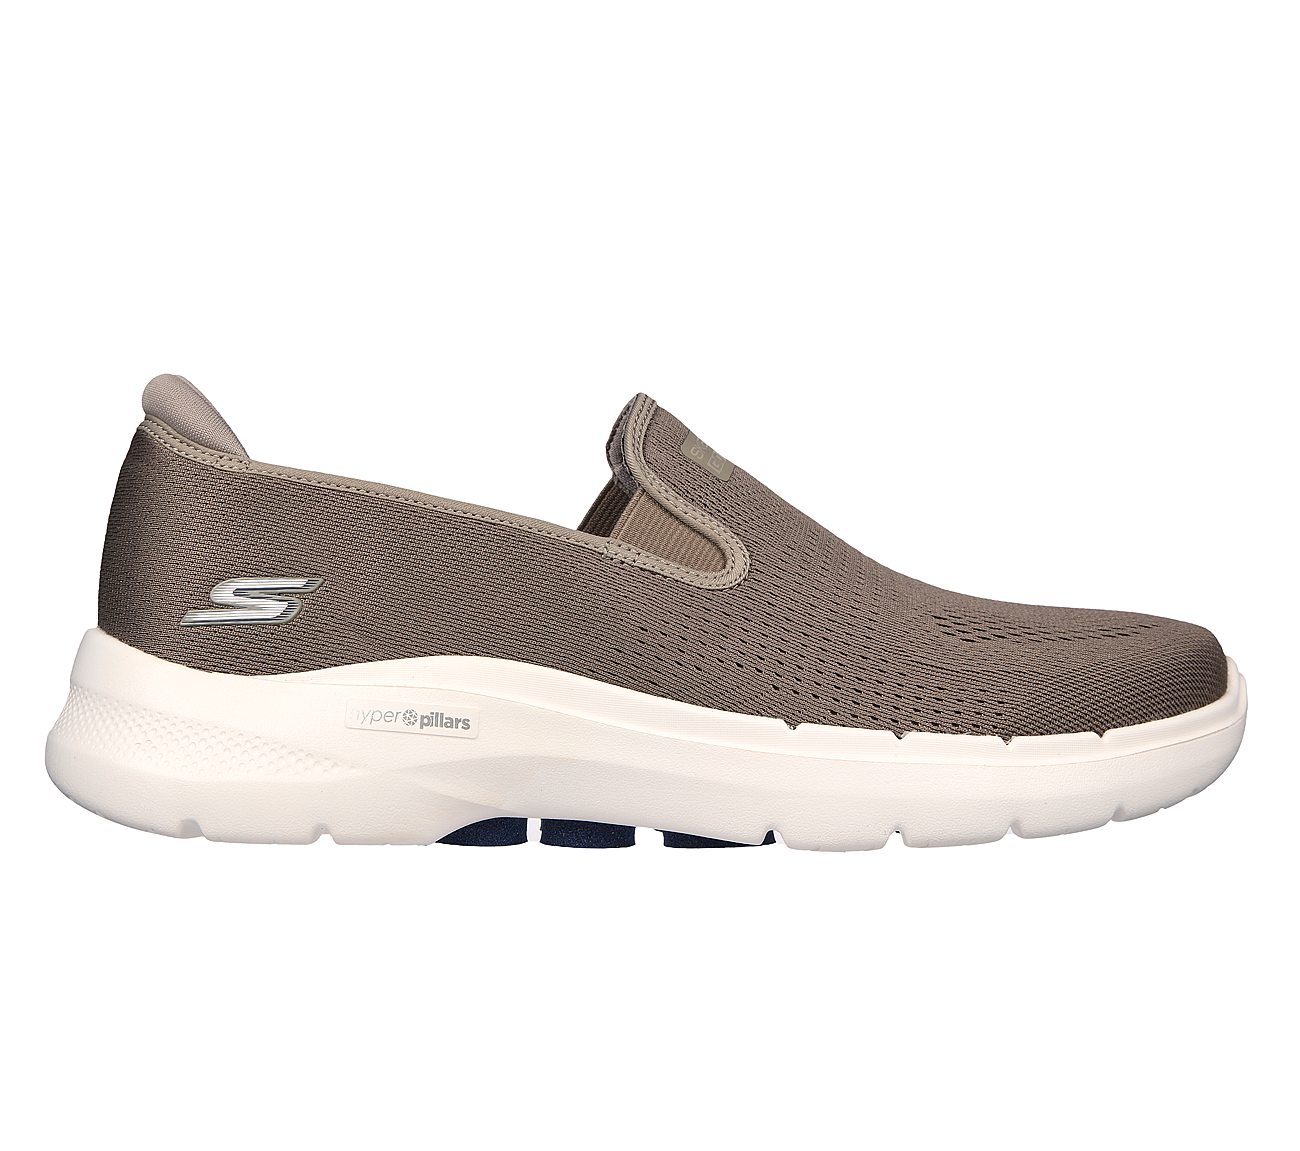 GO WALK 6, TAUPE/NAVY Footwear Right View